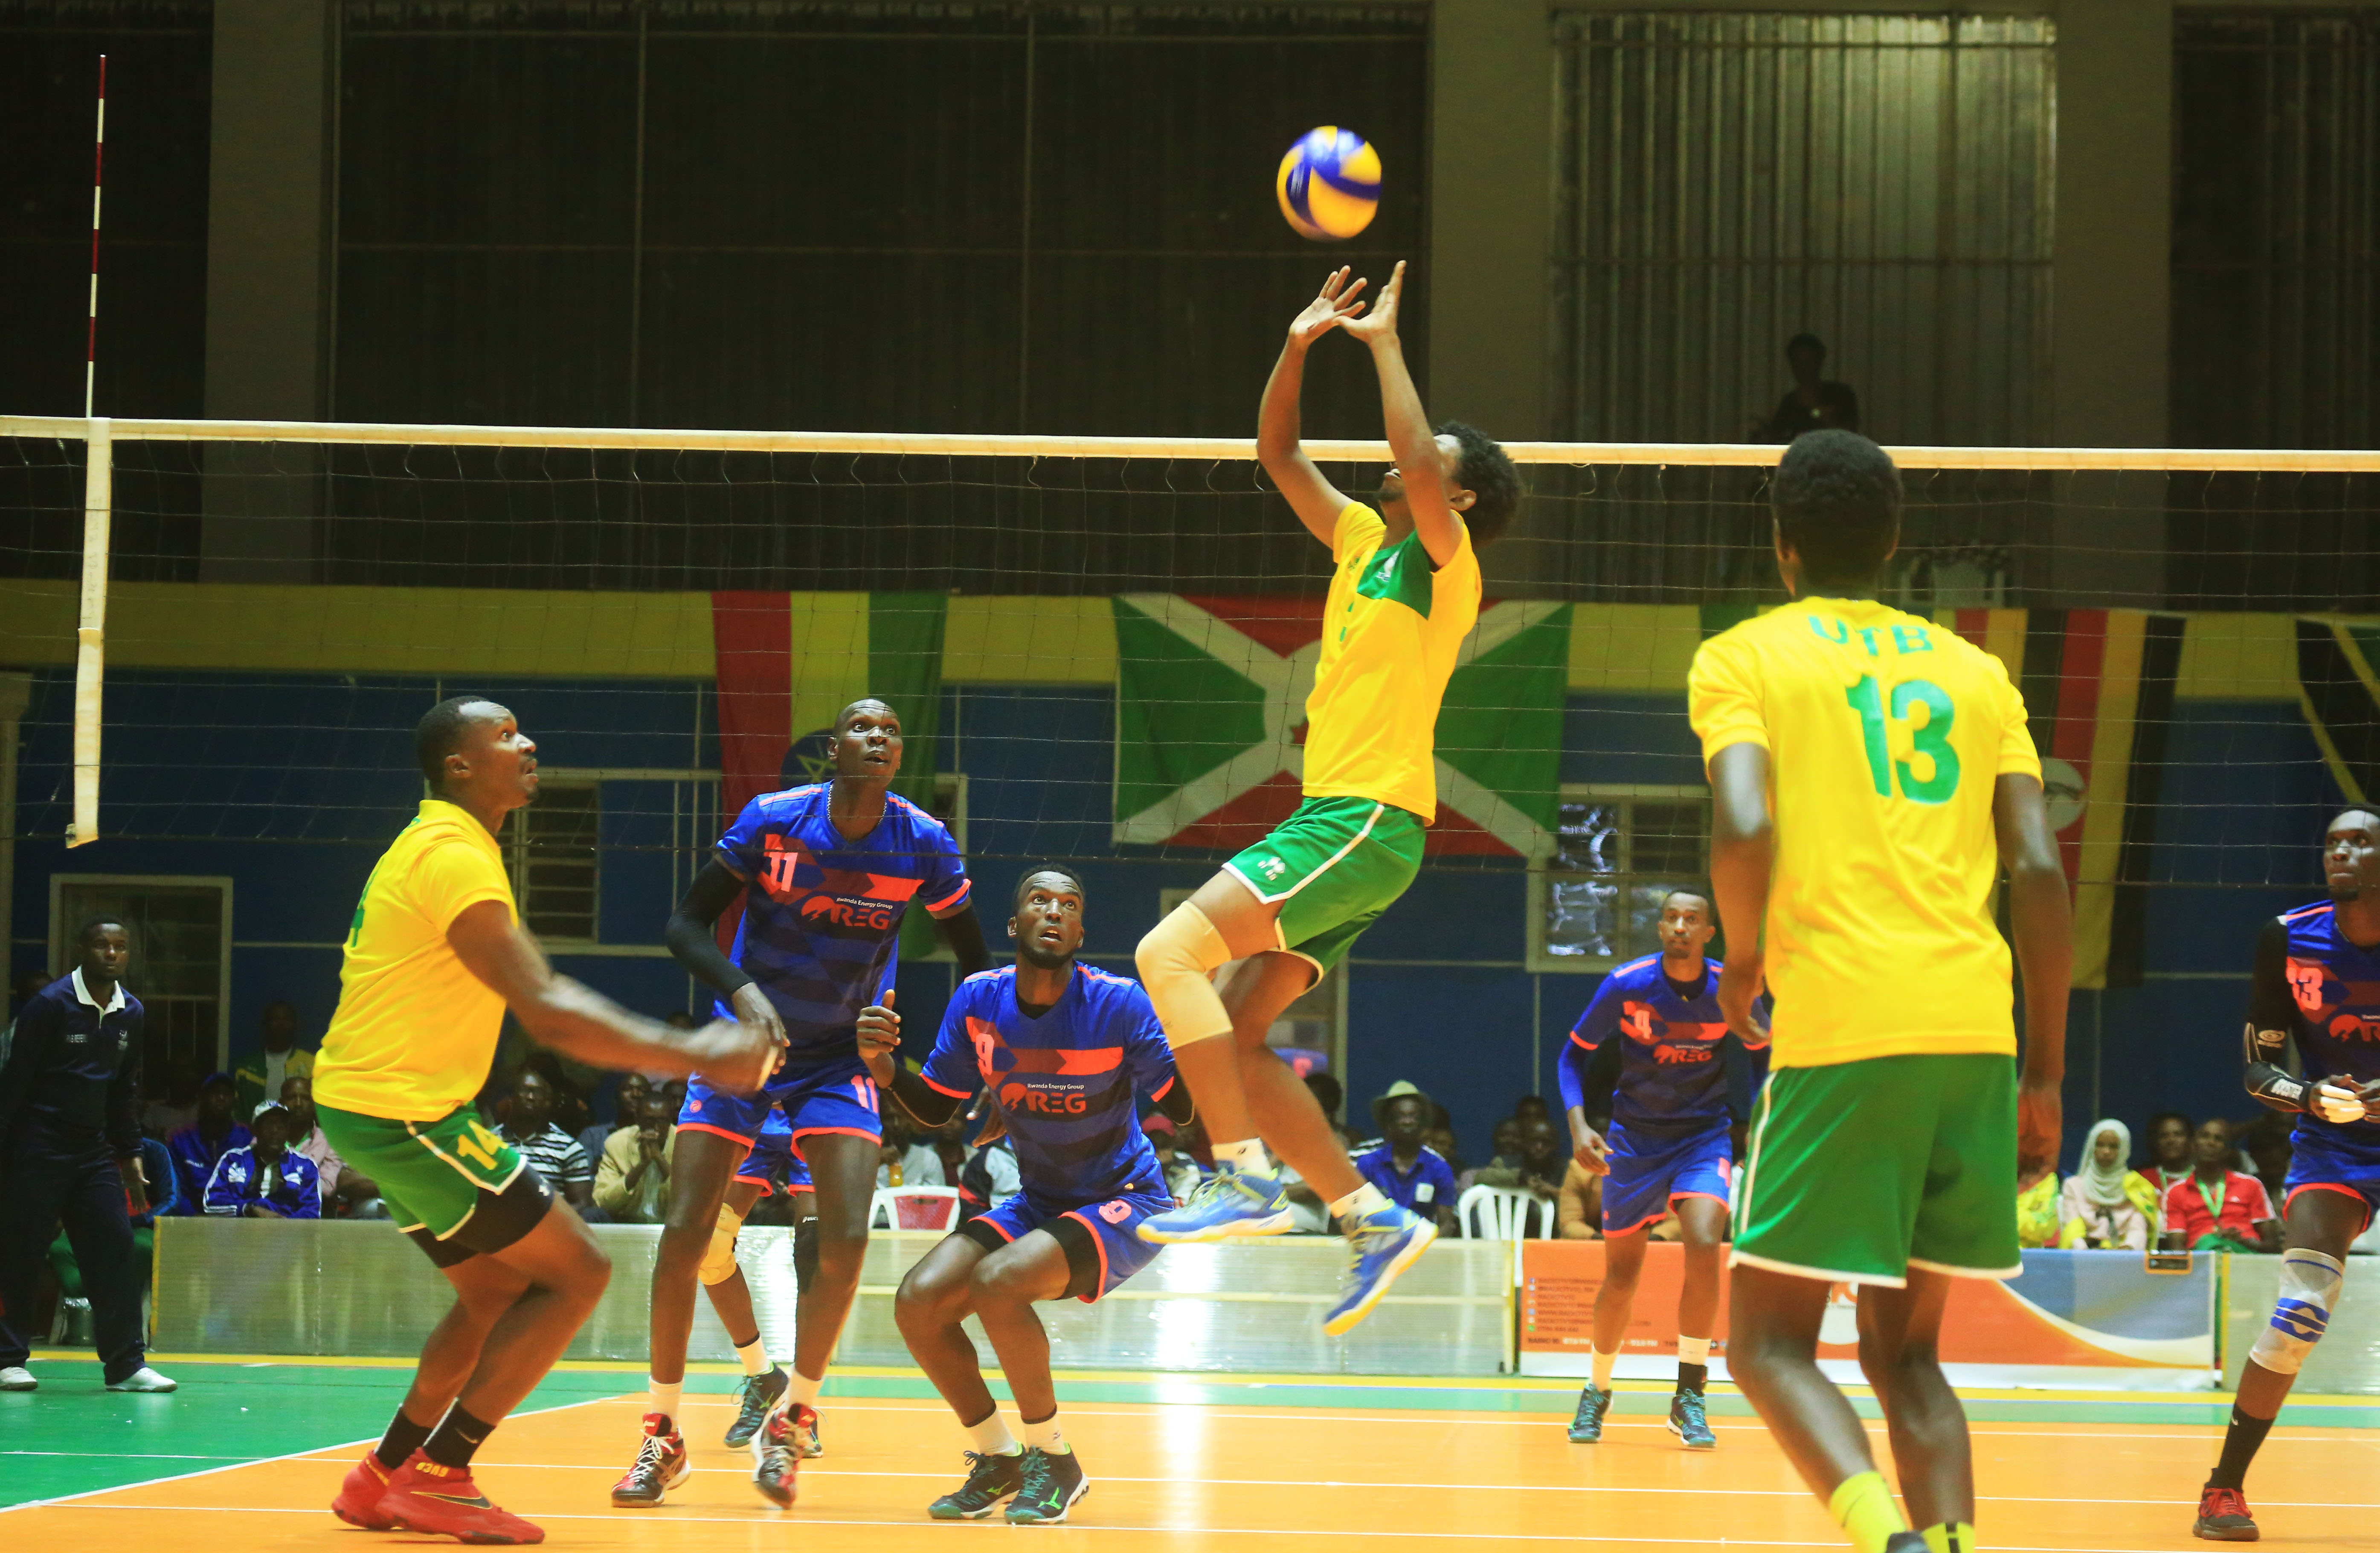 UTB volleyball club setter Ivan Mahoro Nsabimana sets the ball for Placide Sibomana (L) during their semi-final clash against REG, which they lost in four sets (25-21, 22-25, 29-31 and 23-25) at Amahoro Stadium on Friday night. Sam Ngendahimana